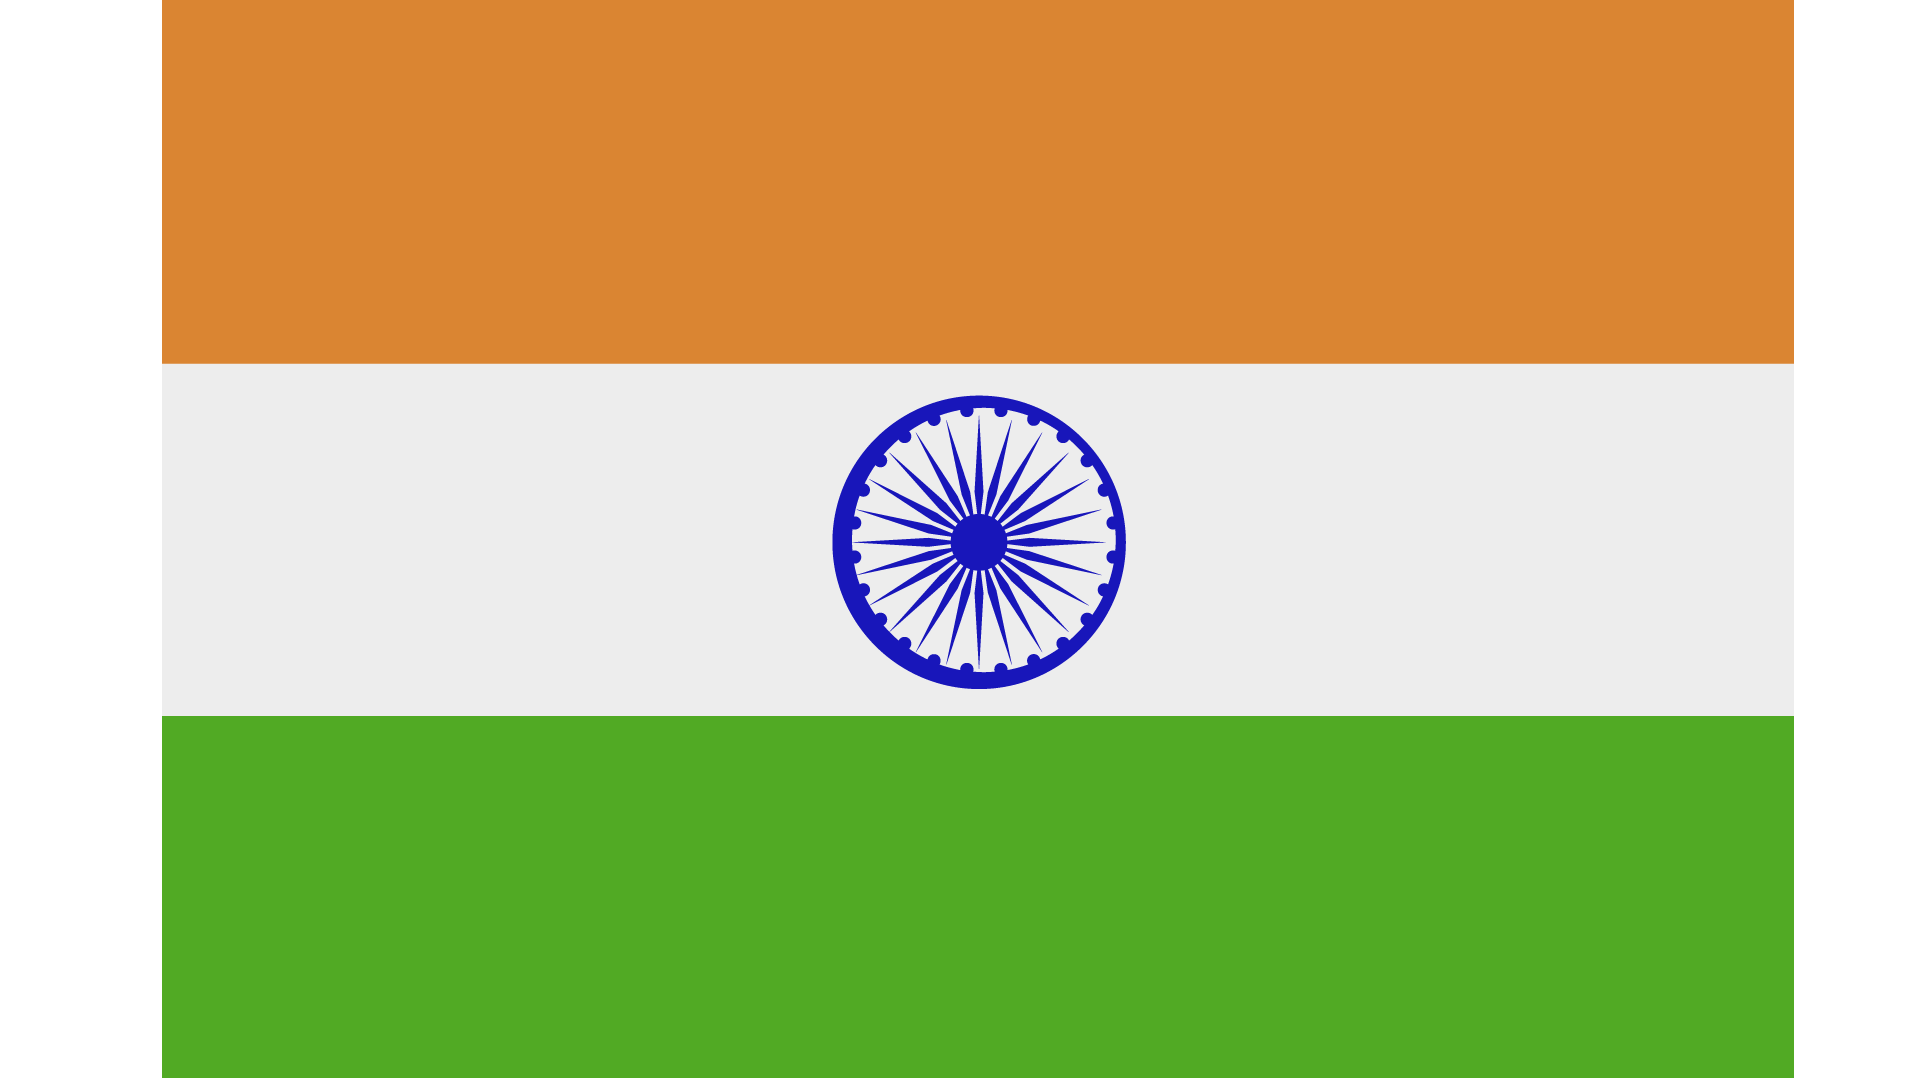 The flag of India with vertical stripes in orange, white and green. In the middle is a circular structure.